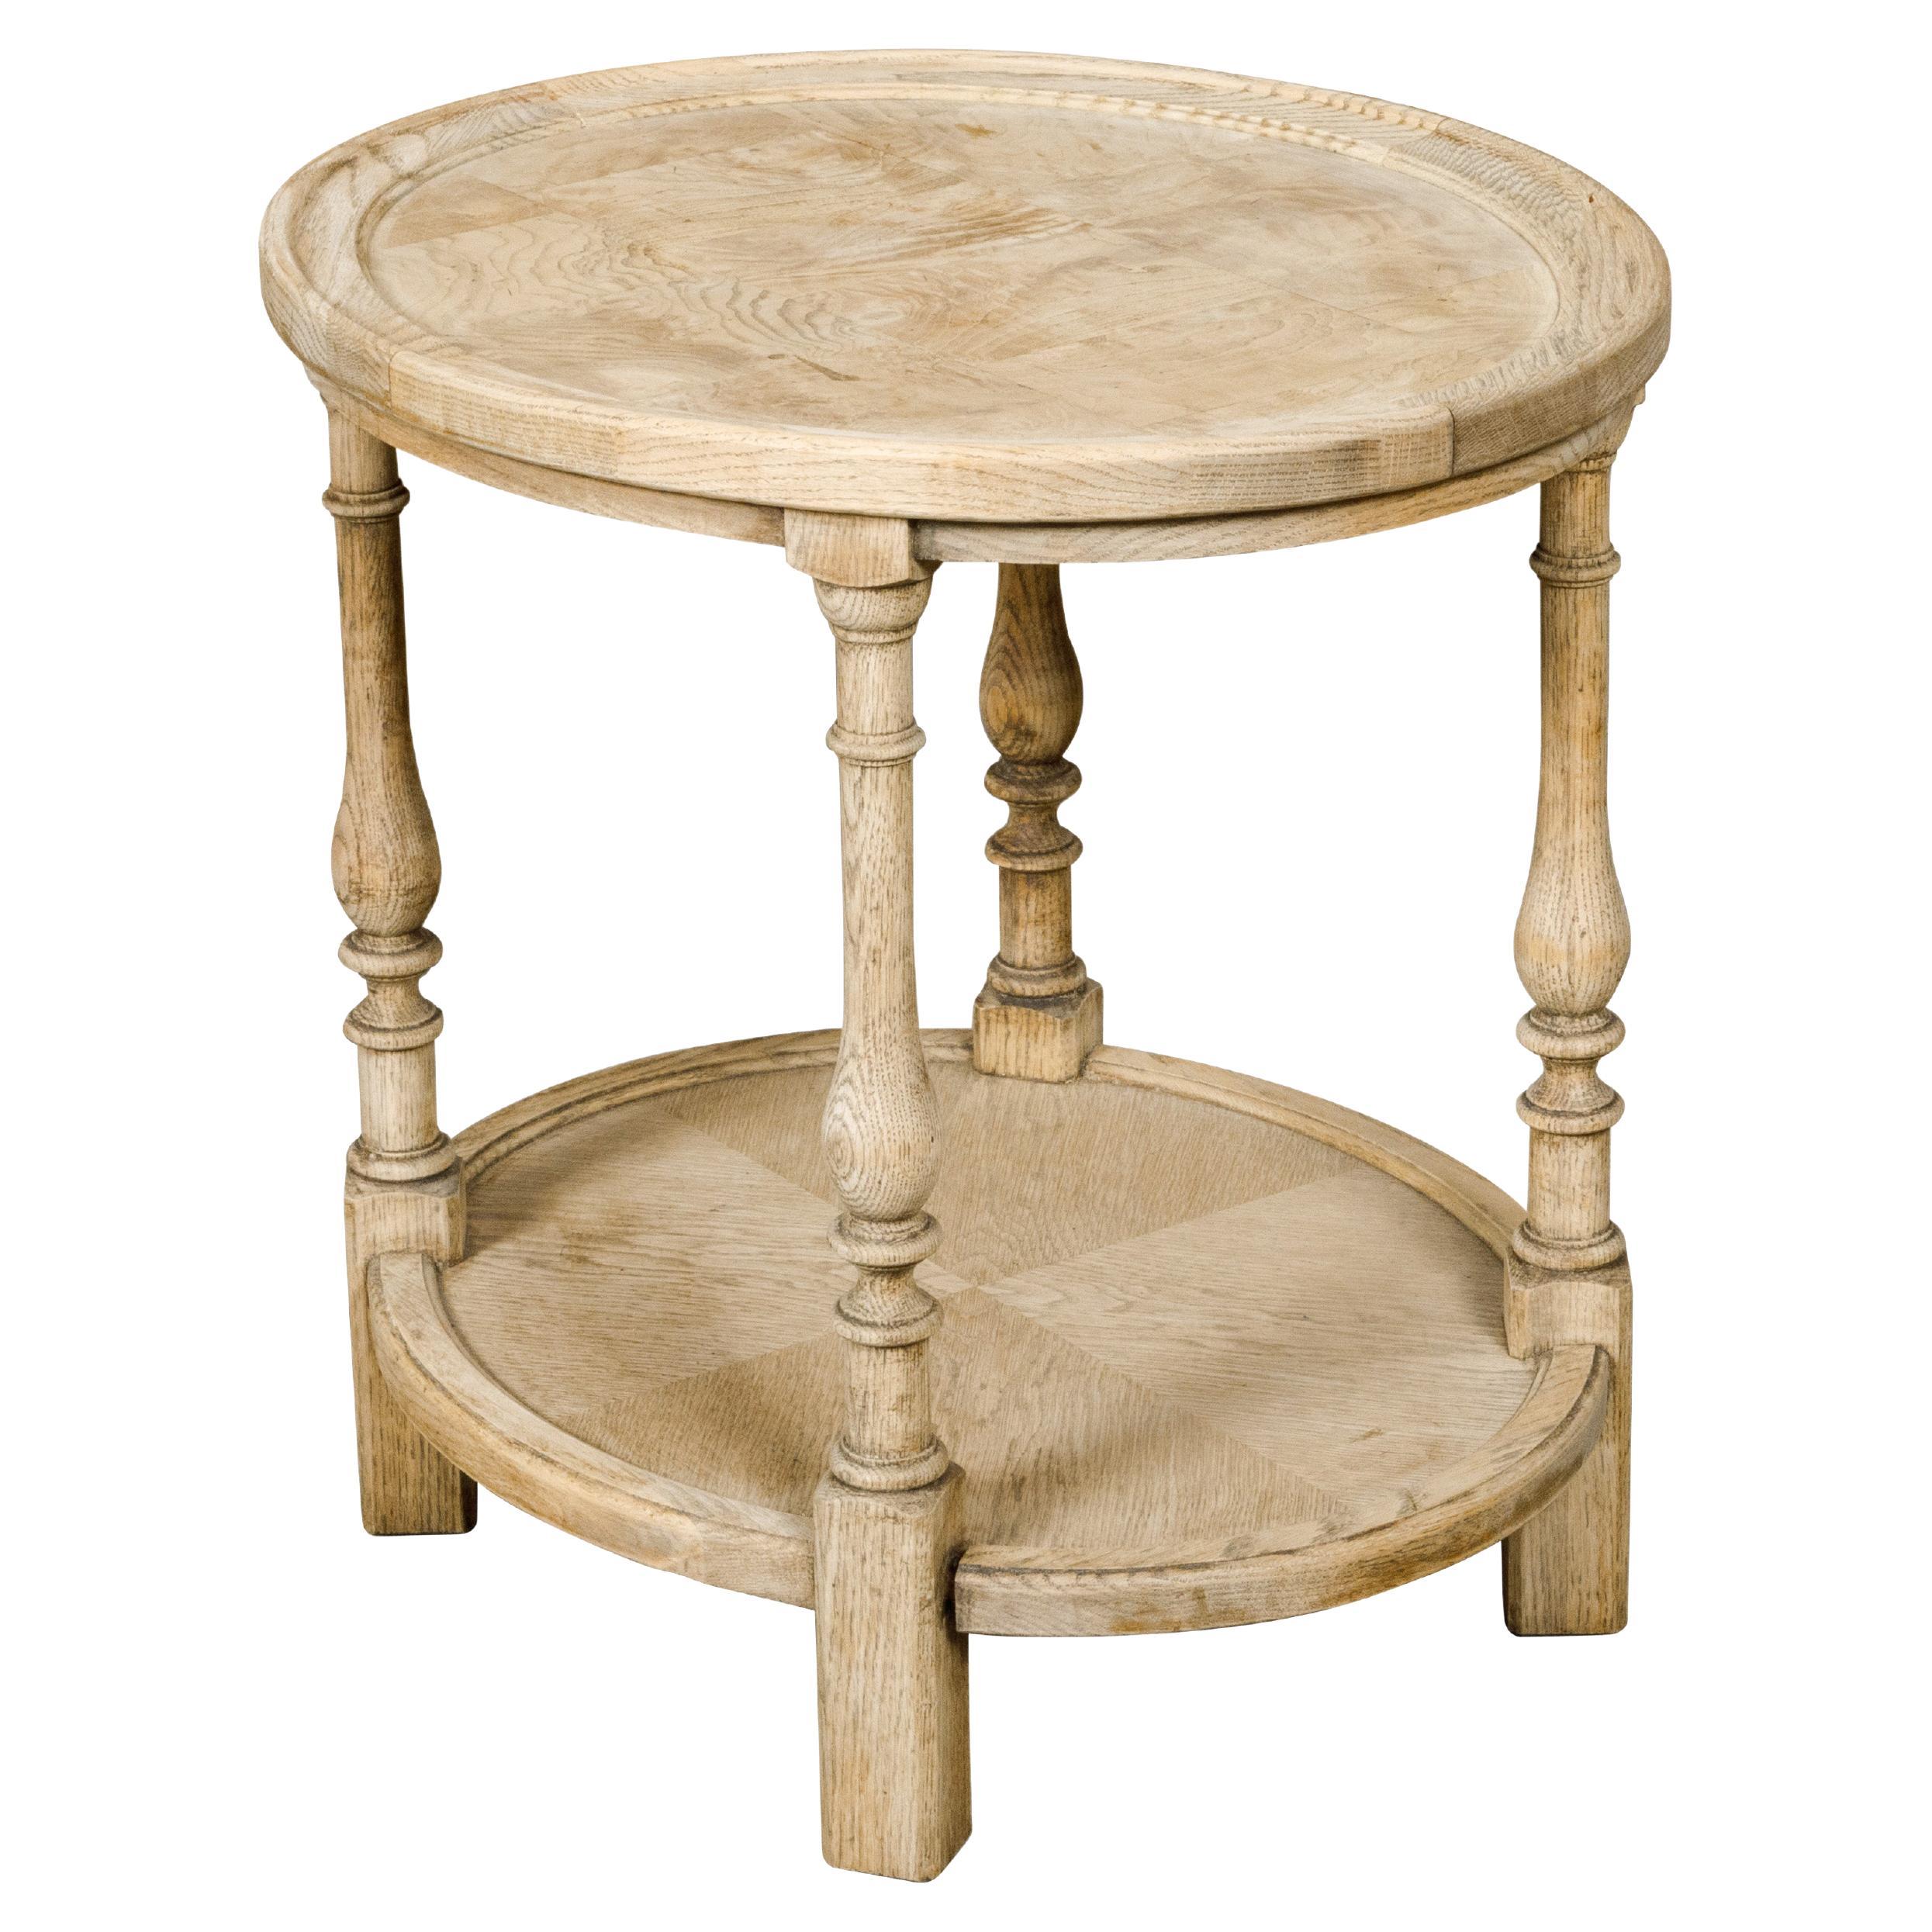 English 1900s Century Bleached Elmwood Tiered Side Table with Baluster Legs For Sale